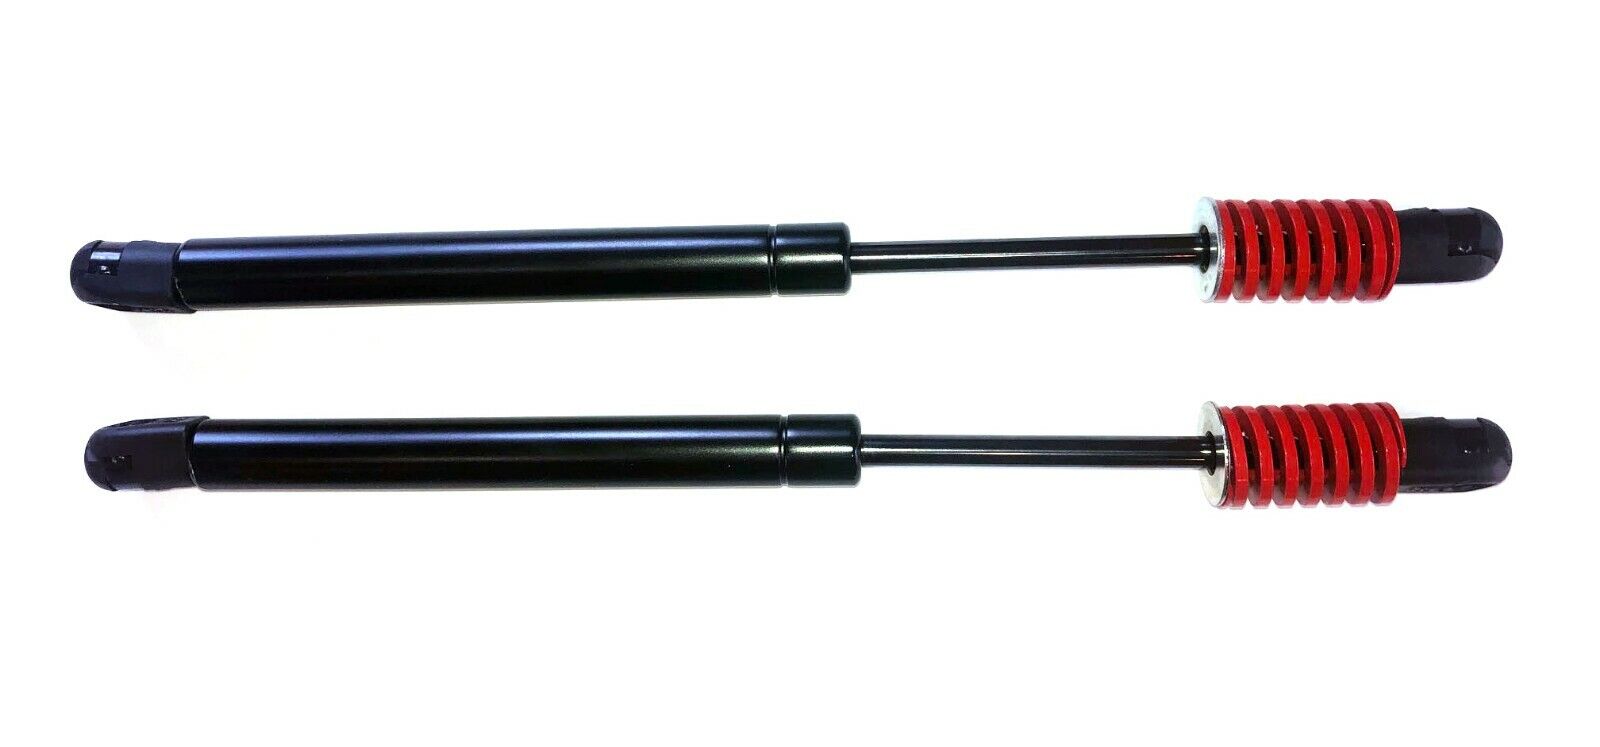 Tesla Model 3 Automatic Trunk lift struts (pair) - FREE PRIORITY SHIPPING